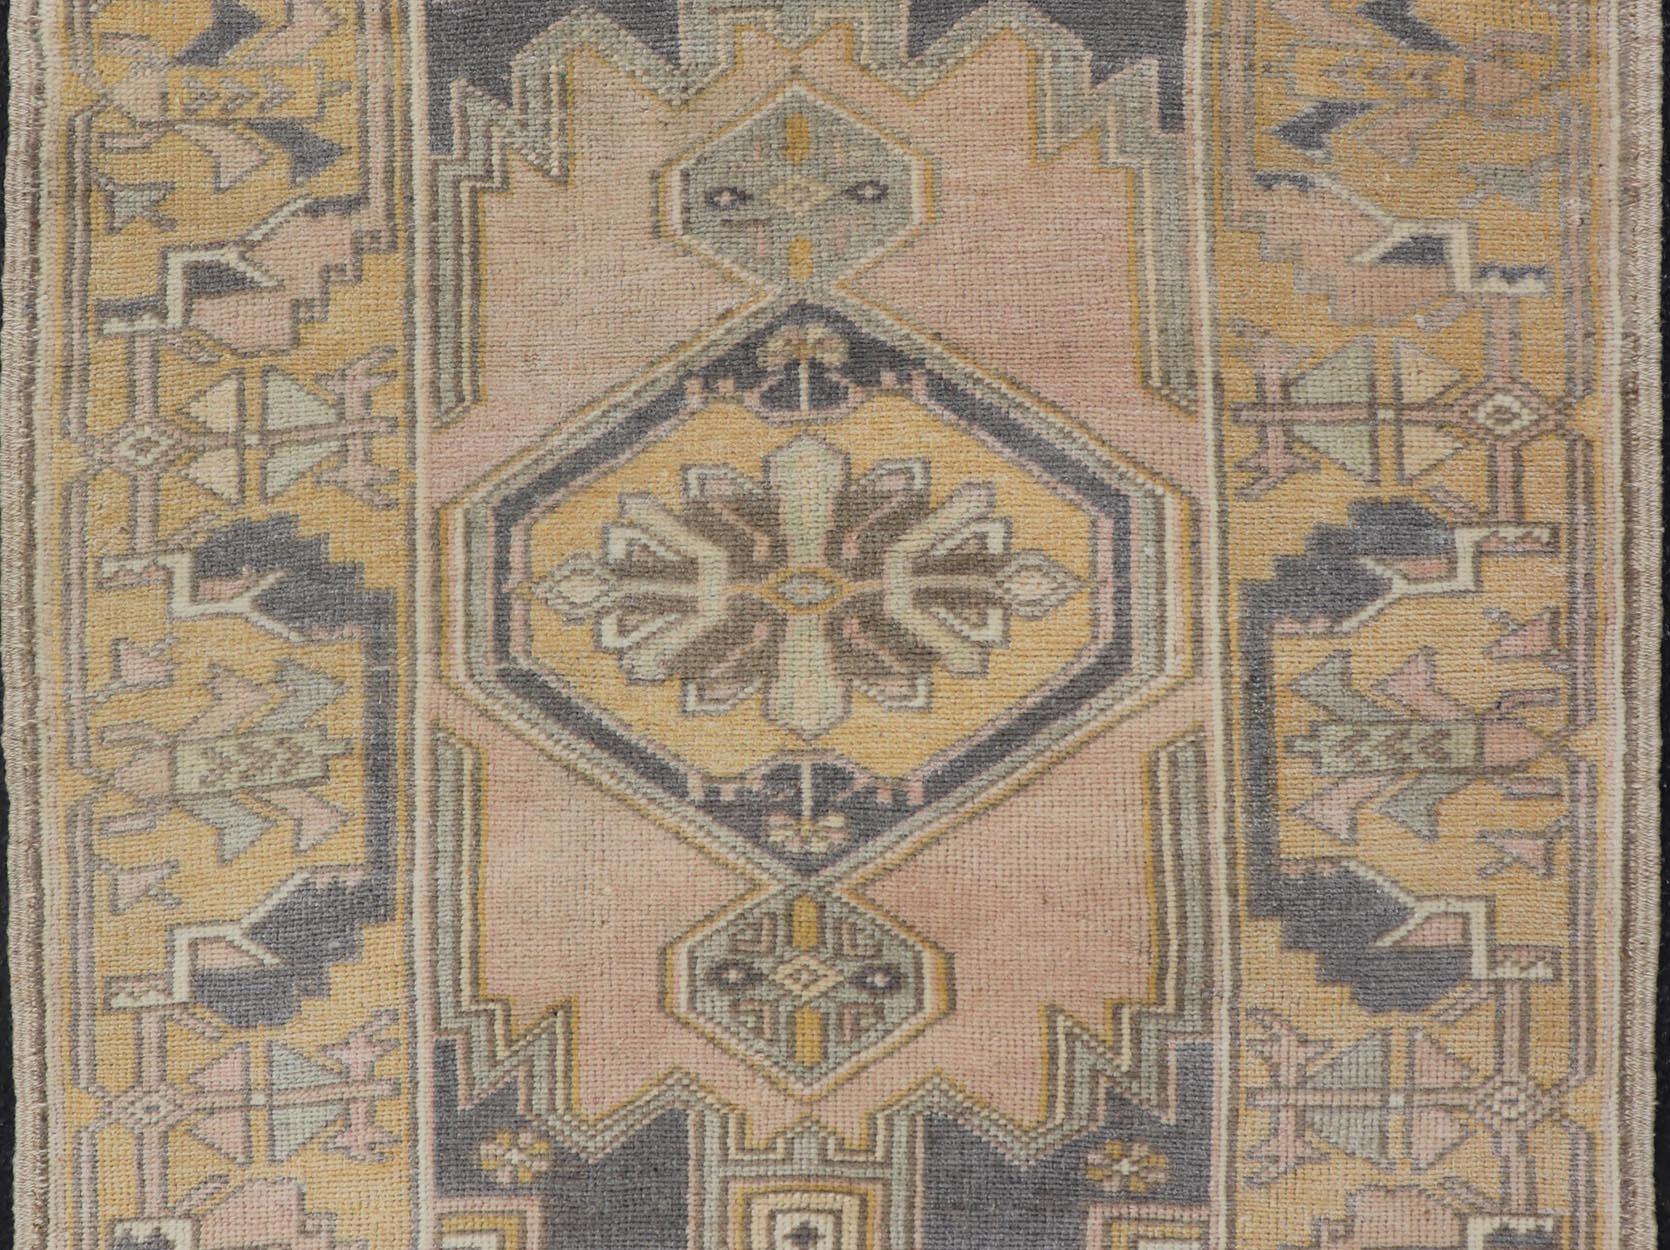 Wool Vintage Oushak Rug from Turkey with Medallion Design in Yellow, Pink, Grey Blue For Sale